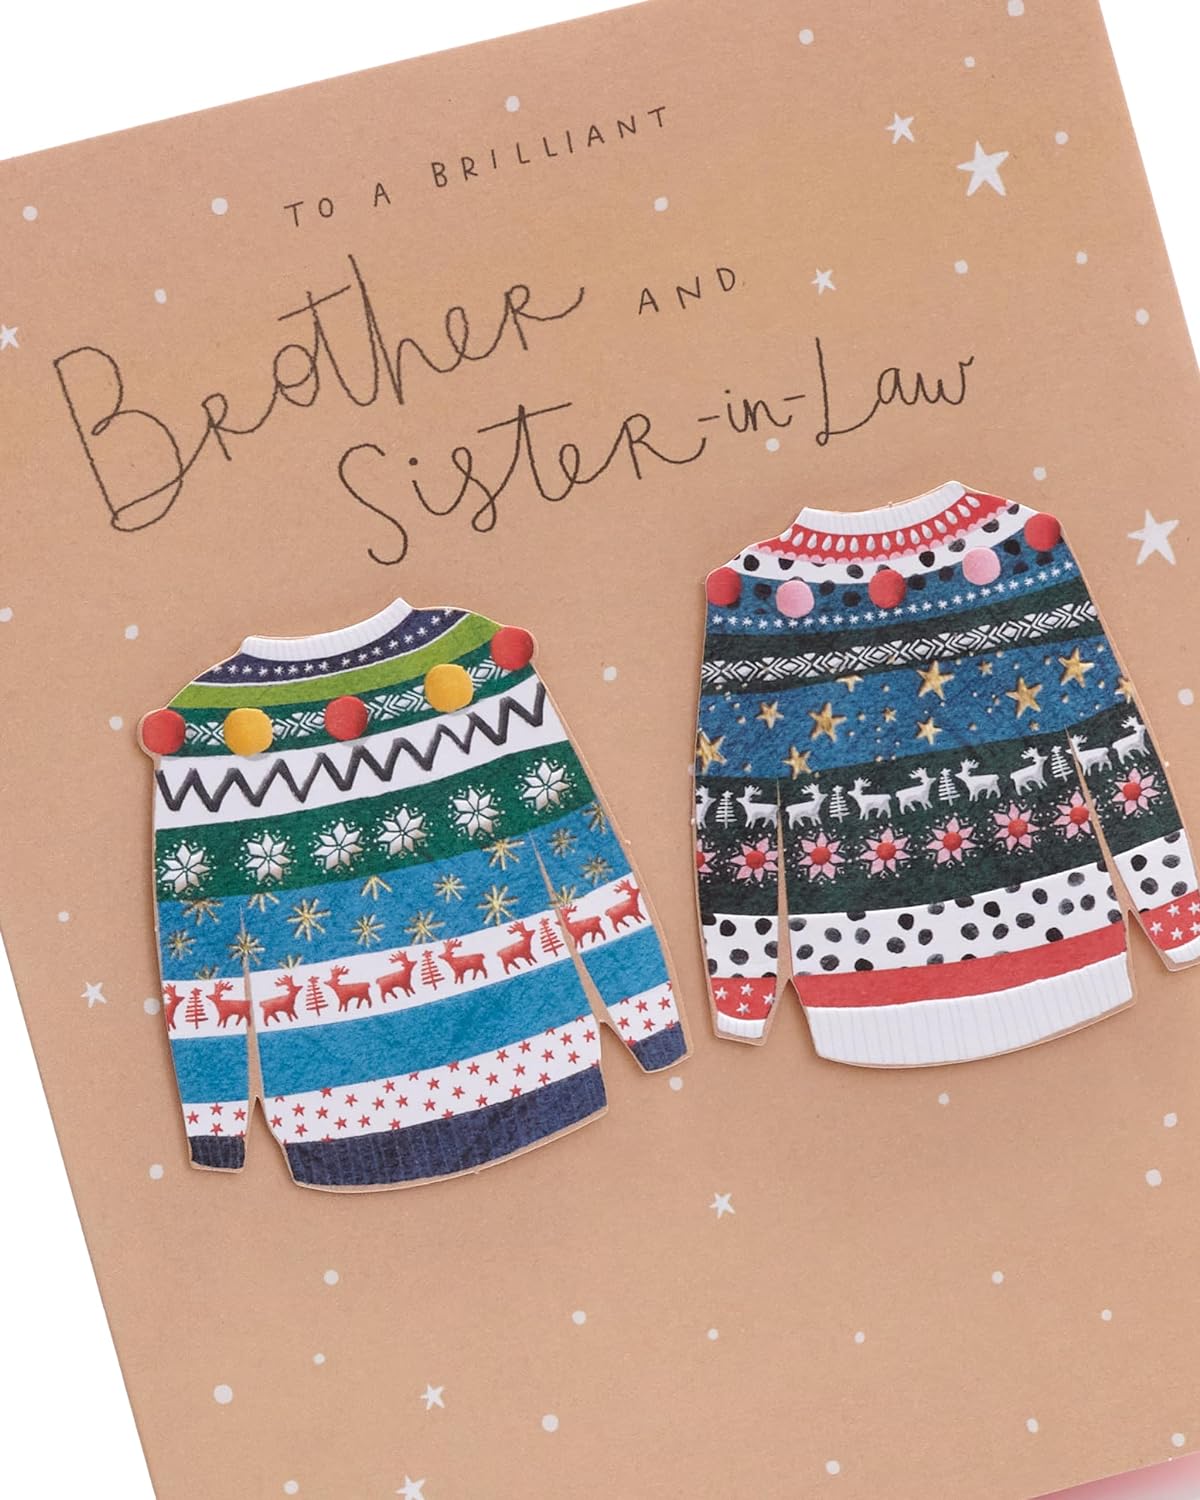 Brother and Sister-in-Law Christmas Card Festive Jumpers Design 